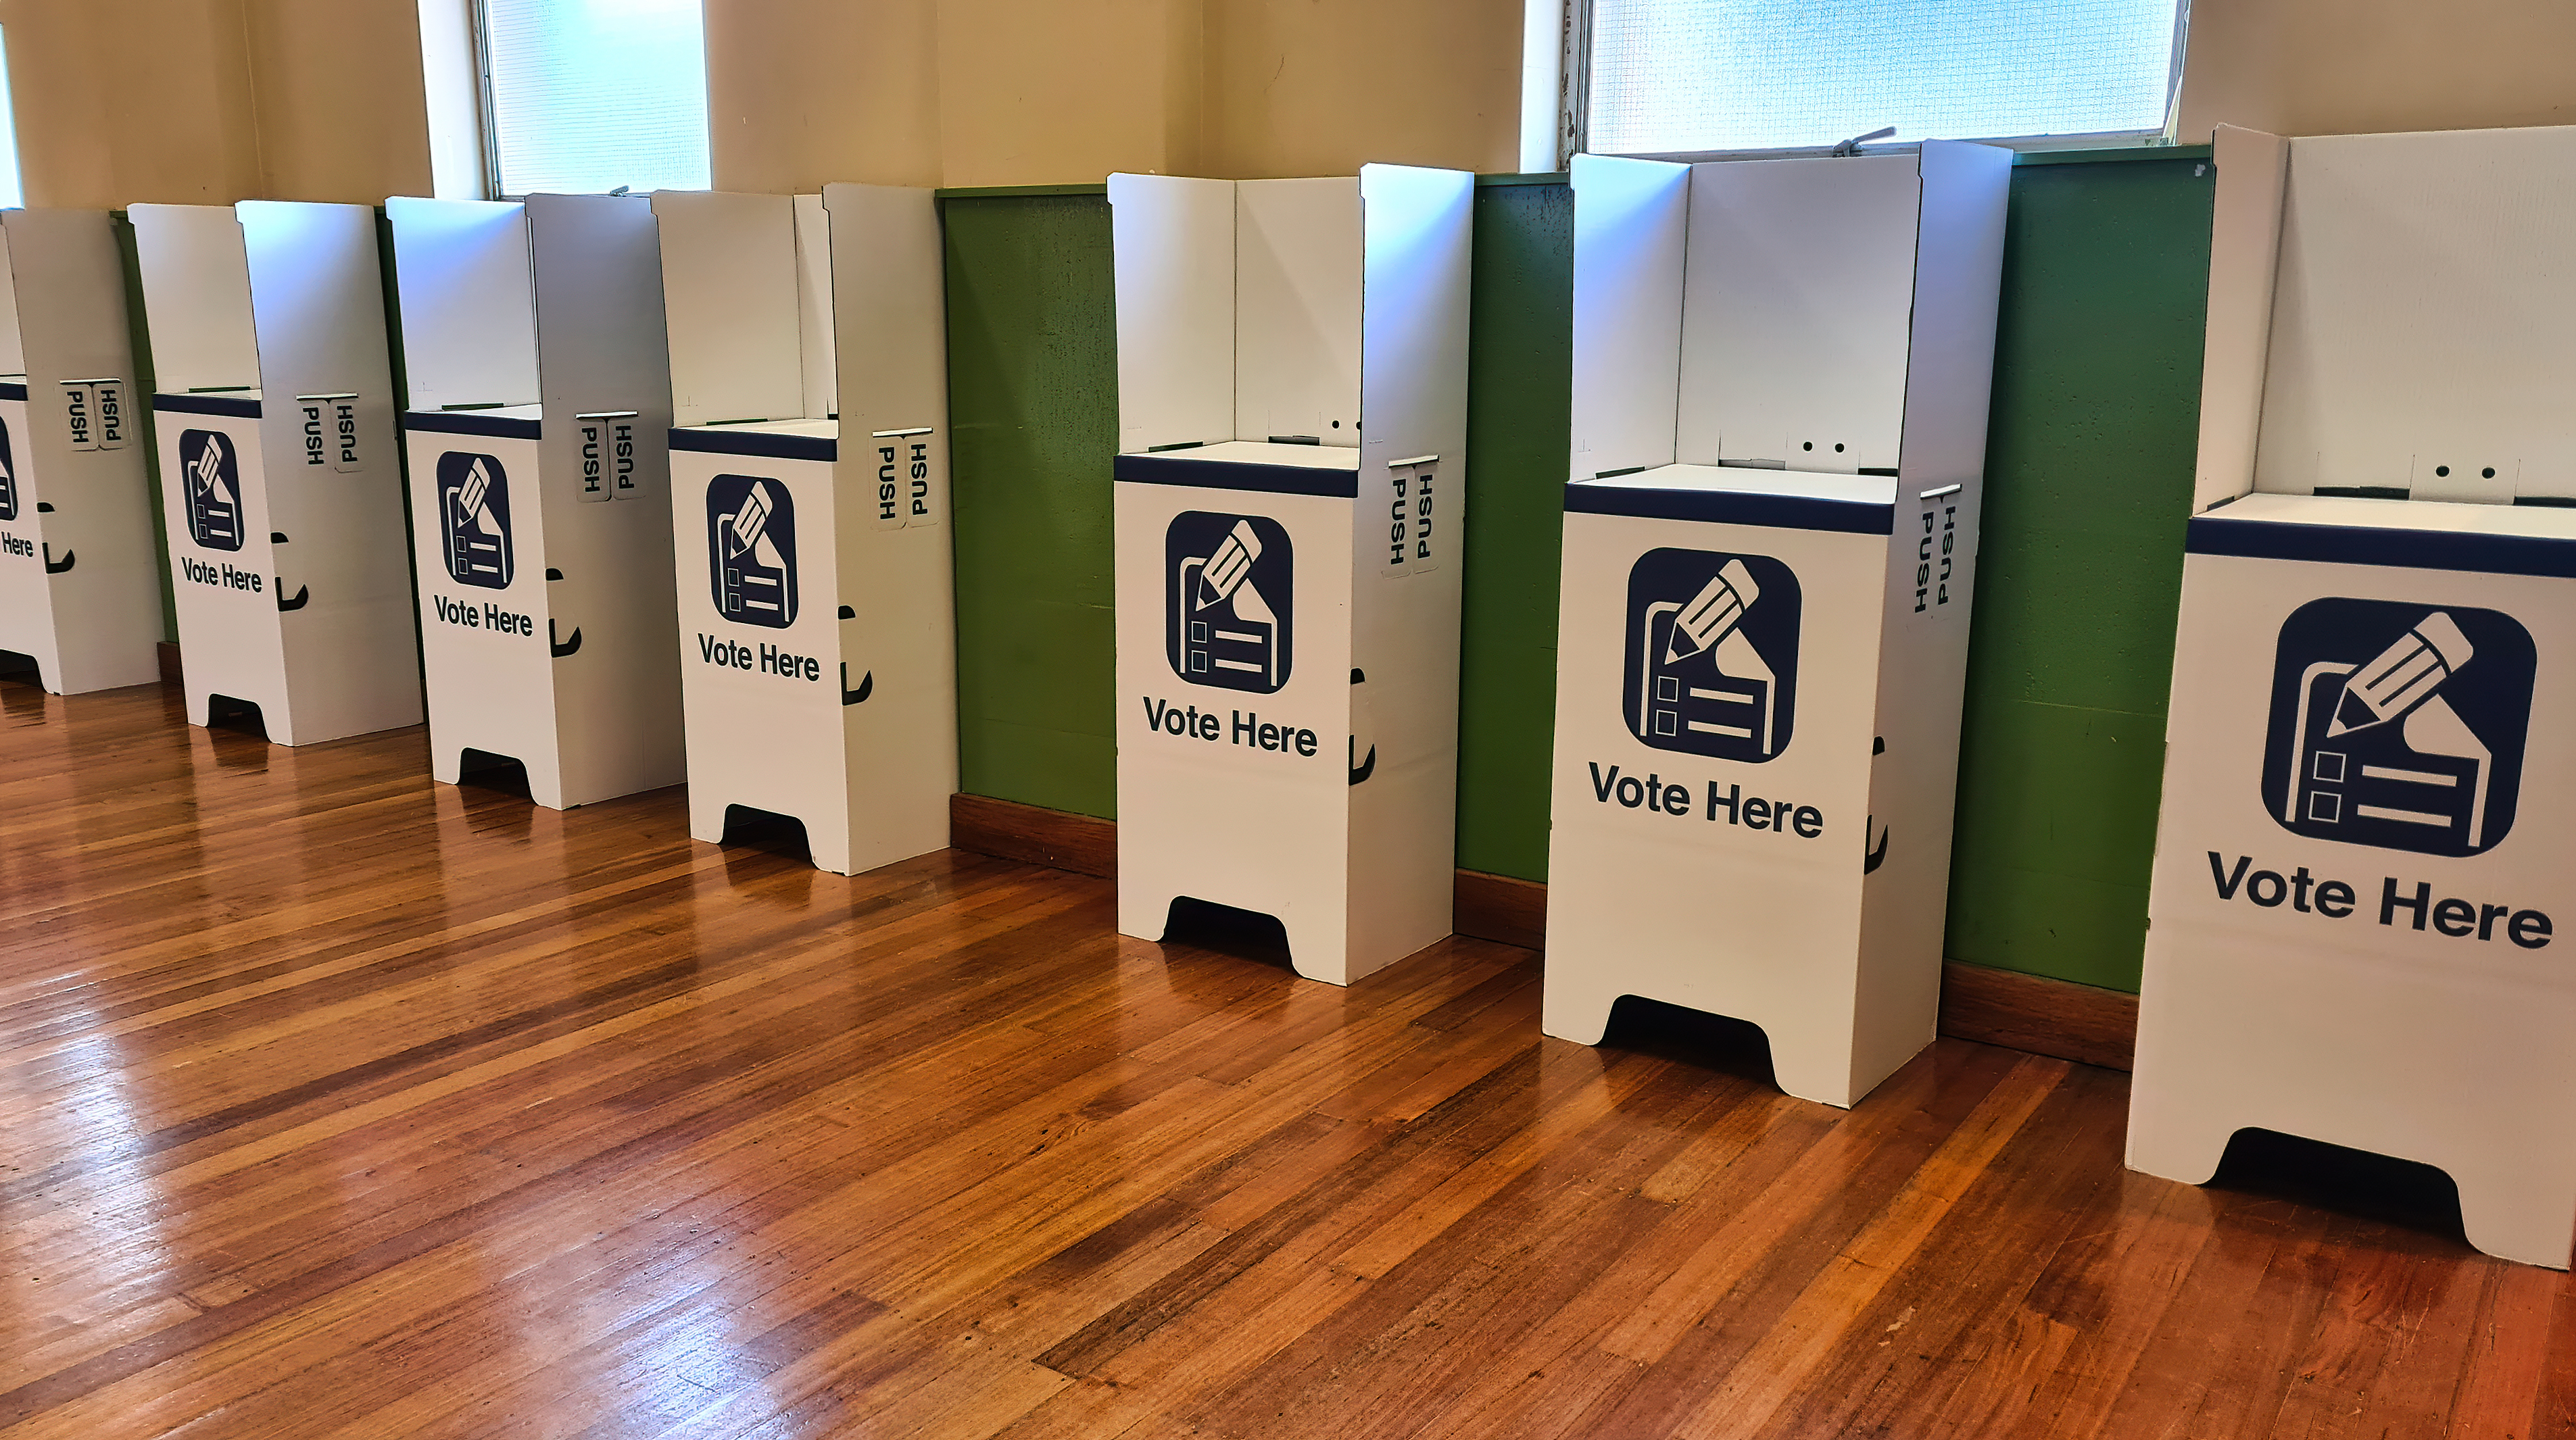 Row of voting booths